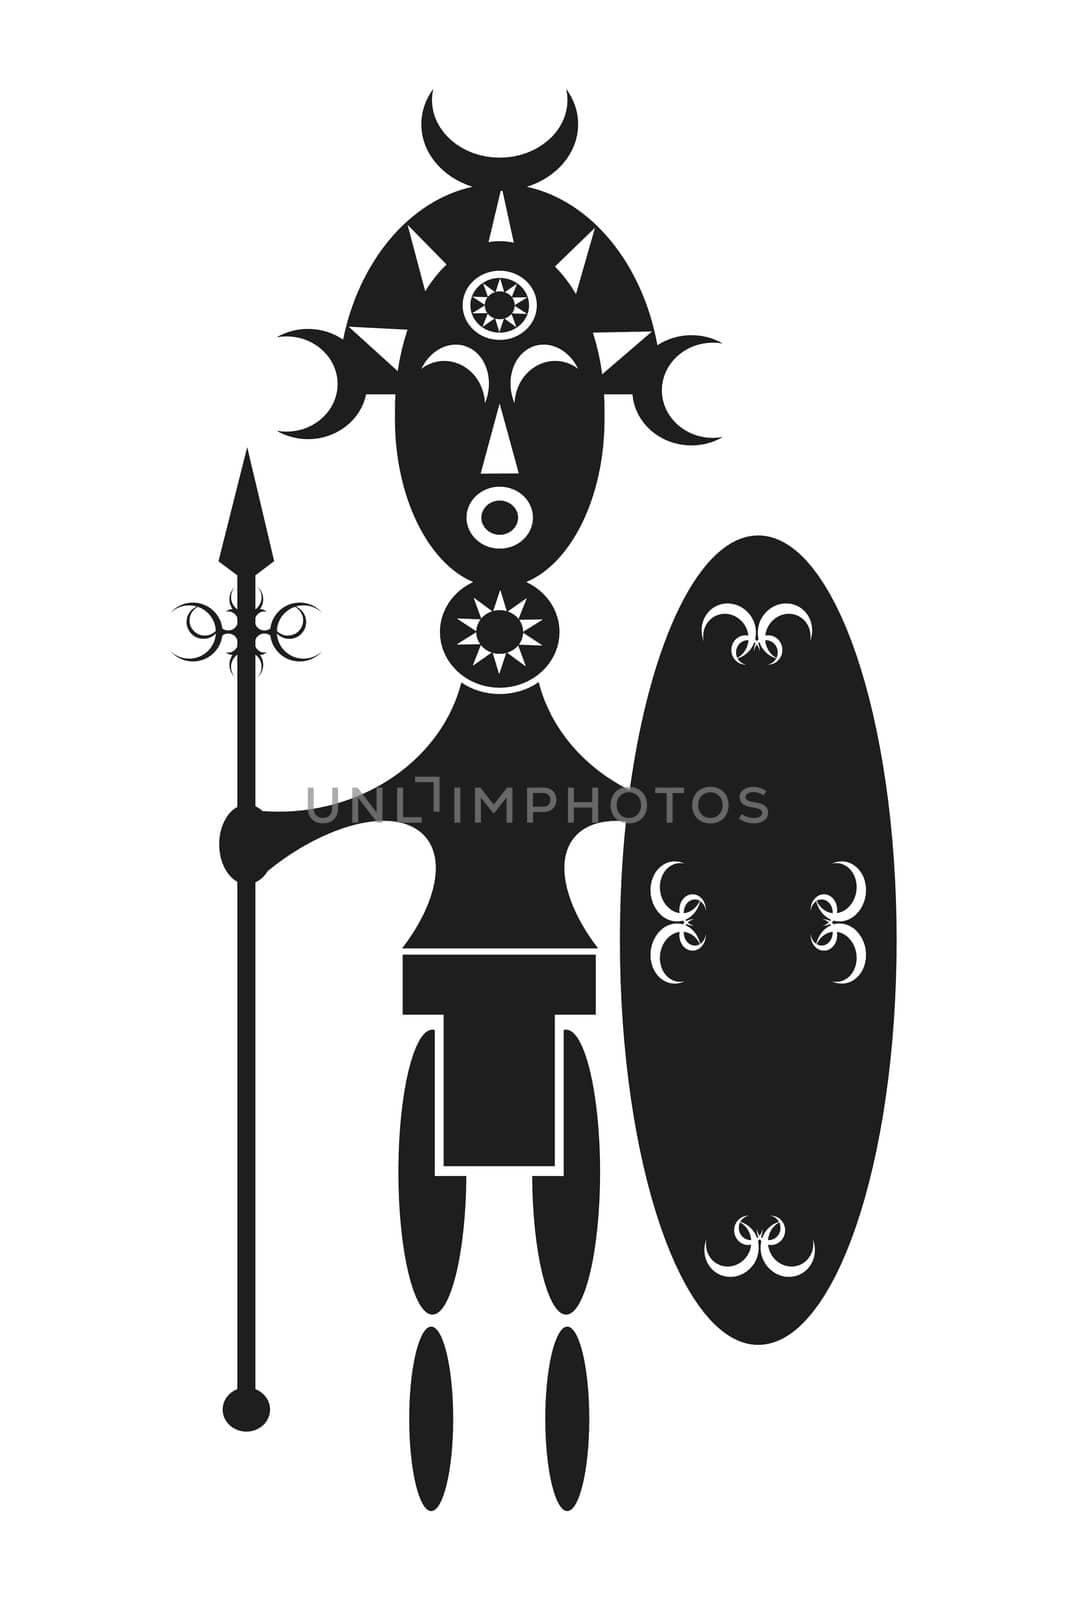 stylised design of an African warrior with shield and spear